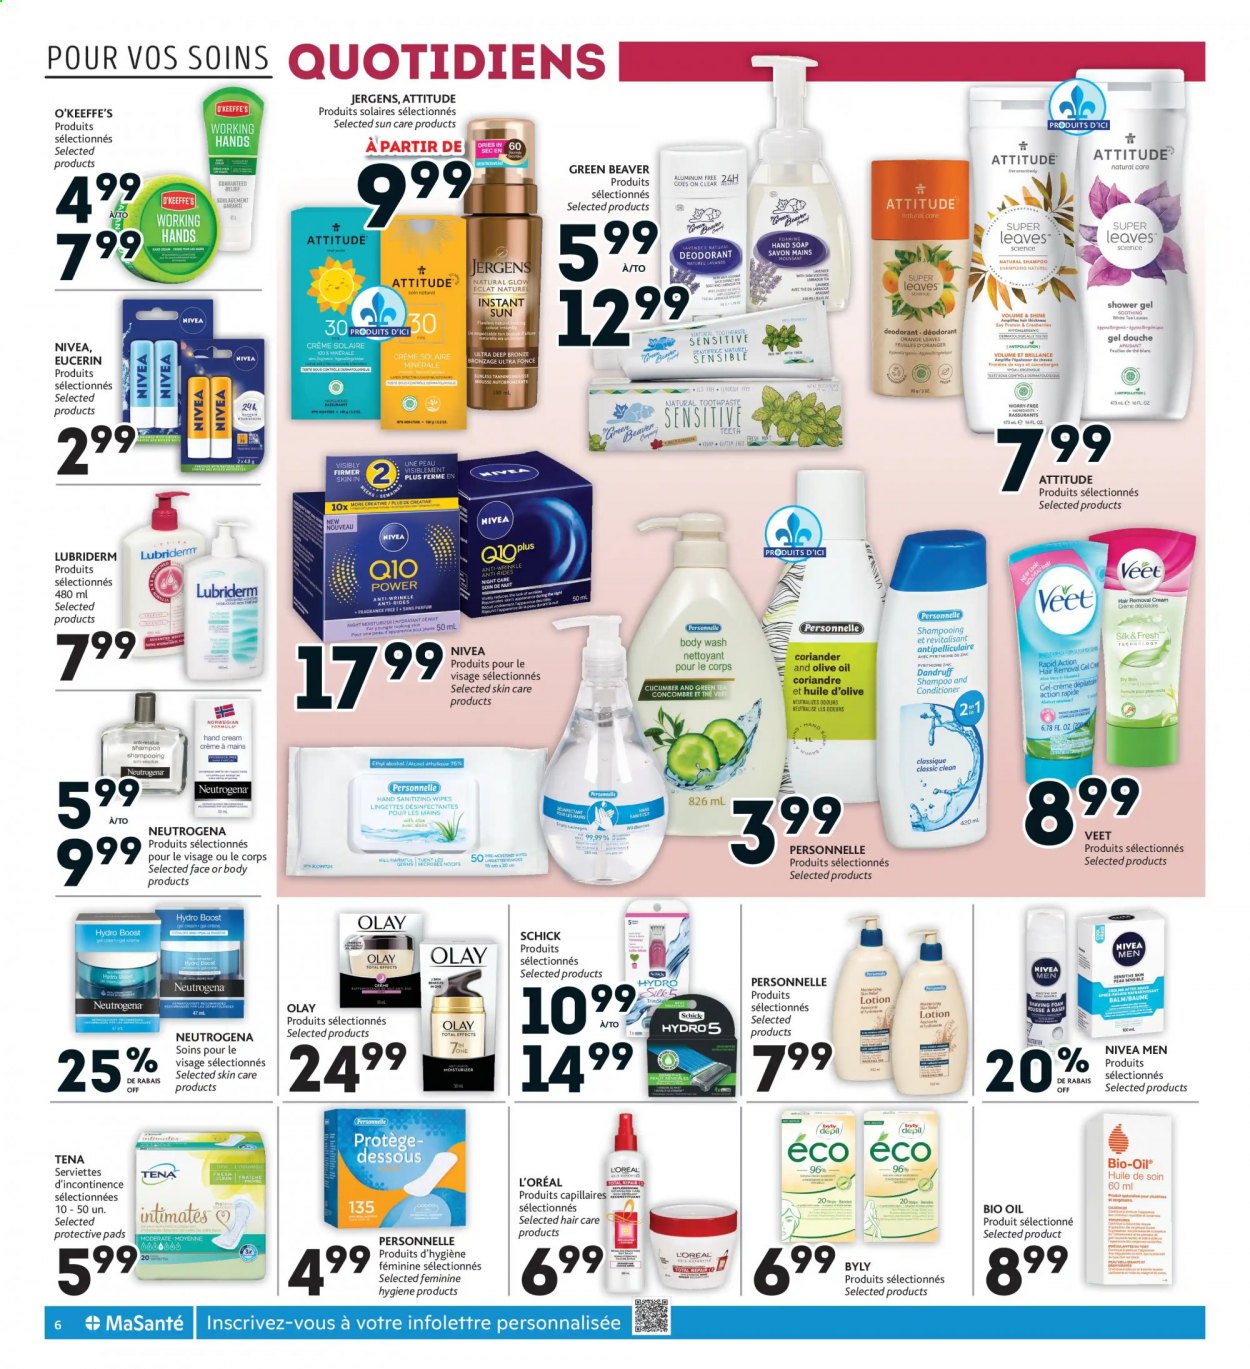 thumbnail - Brunet Flyer - July 08, 2021 - July 14, 2021 - Sales products - wipes, antiseptic wipes, body wash, shower gel, hand soap, soap, toothpaste, L’Oréal, moisturizer, Olay, conditioner, body lotion, Lubriderm, hand cream, Jergens, anti-perspirant, Eclat, Schick, hair removal, shaving foam, Veet, cranberries, zinc, Eucerin, Neutrogena, shampoo, Nivea, deodorant. Page 6.